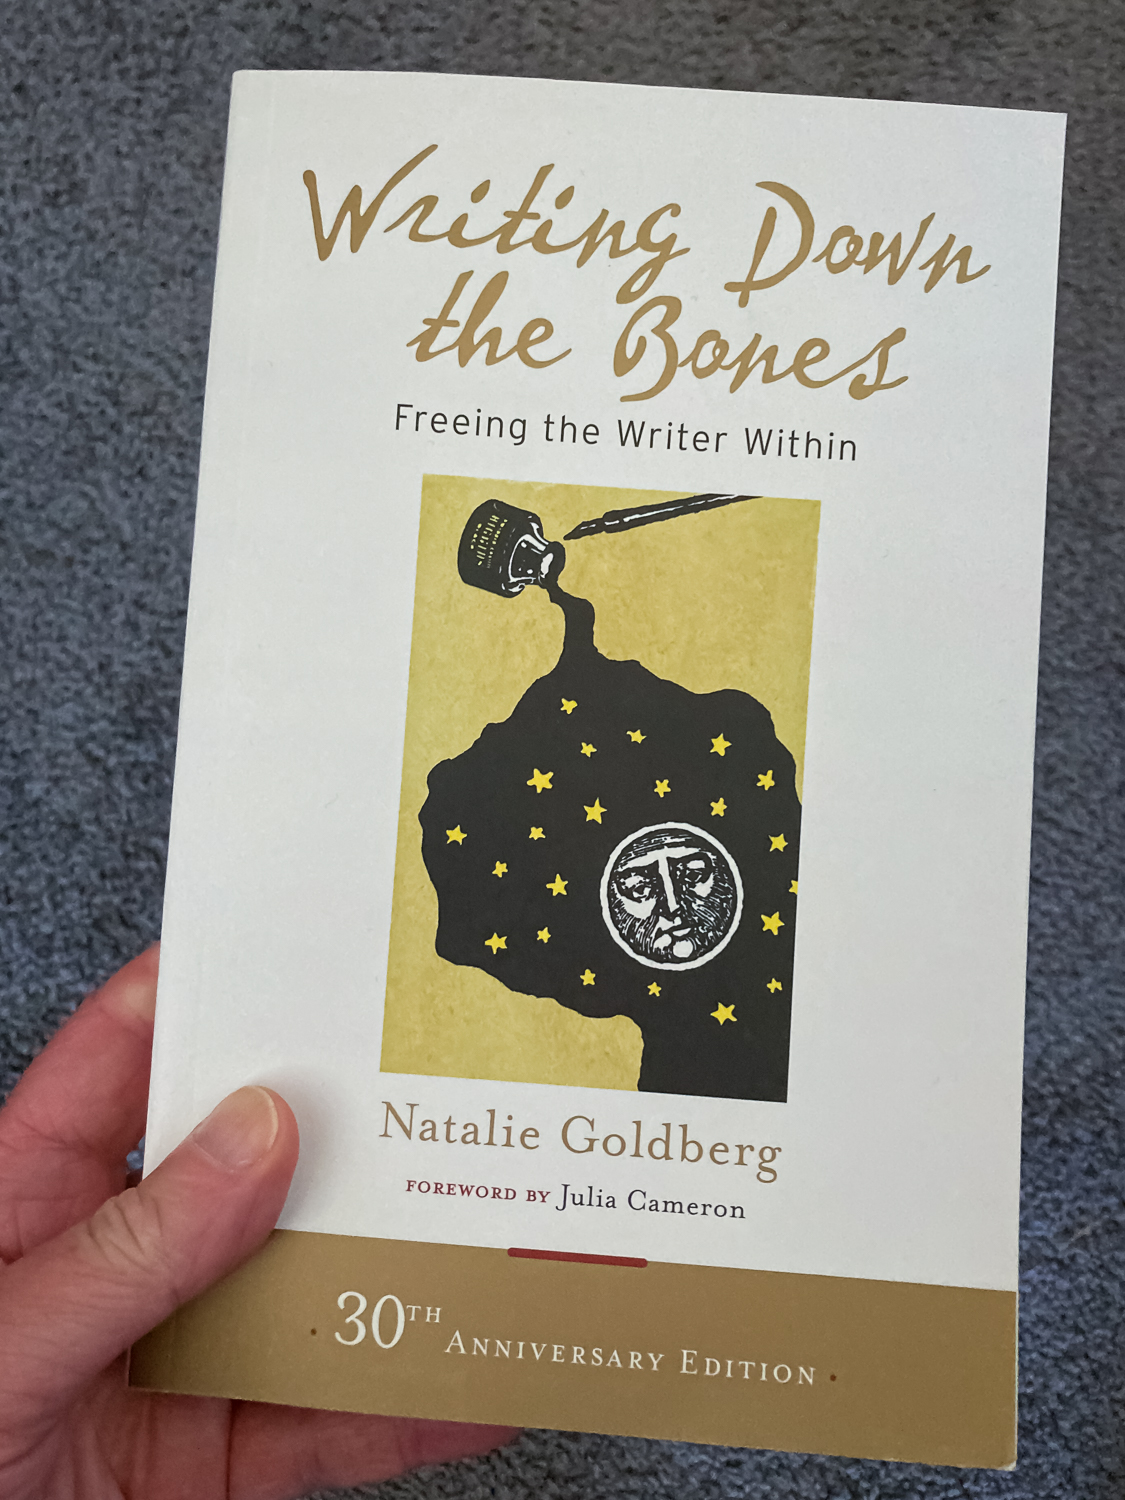 A hand holding the book Writing Down The Bones by Natalie Goldberg, one of the books from my 2023 reading list